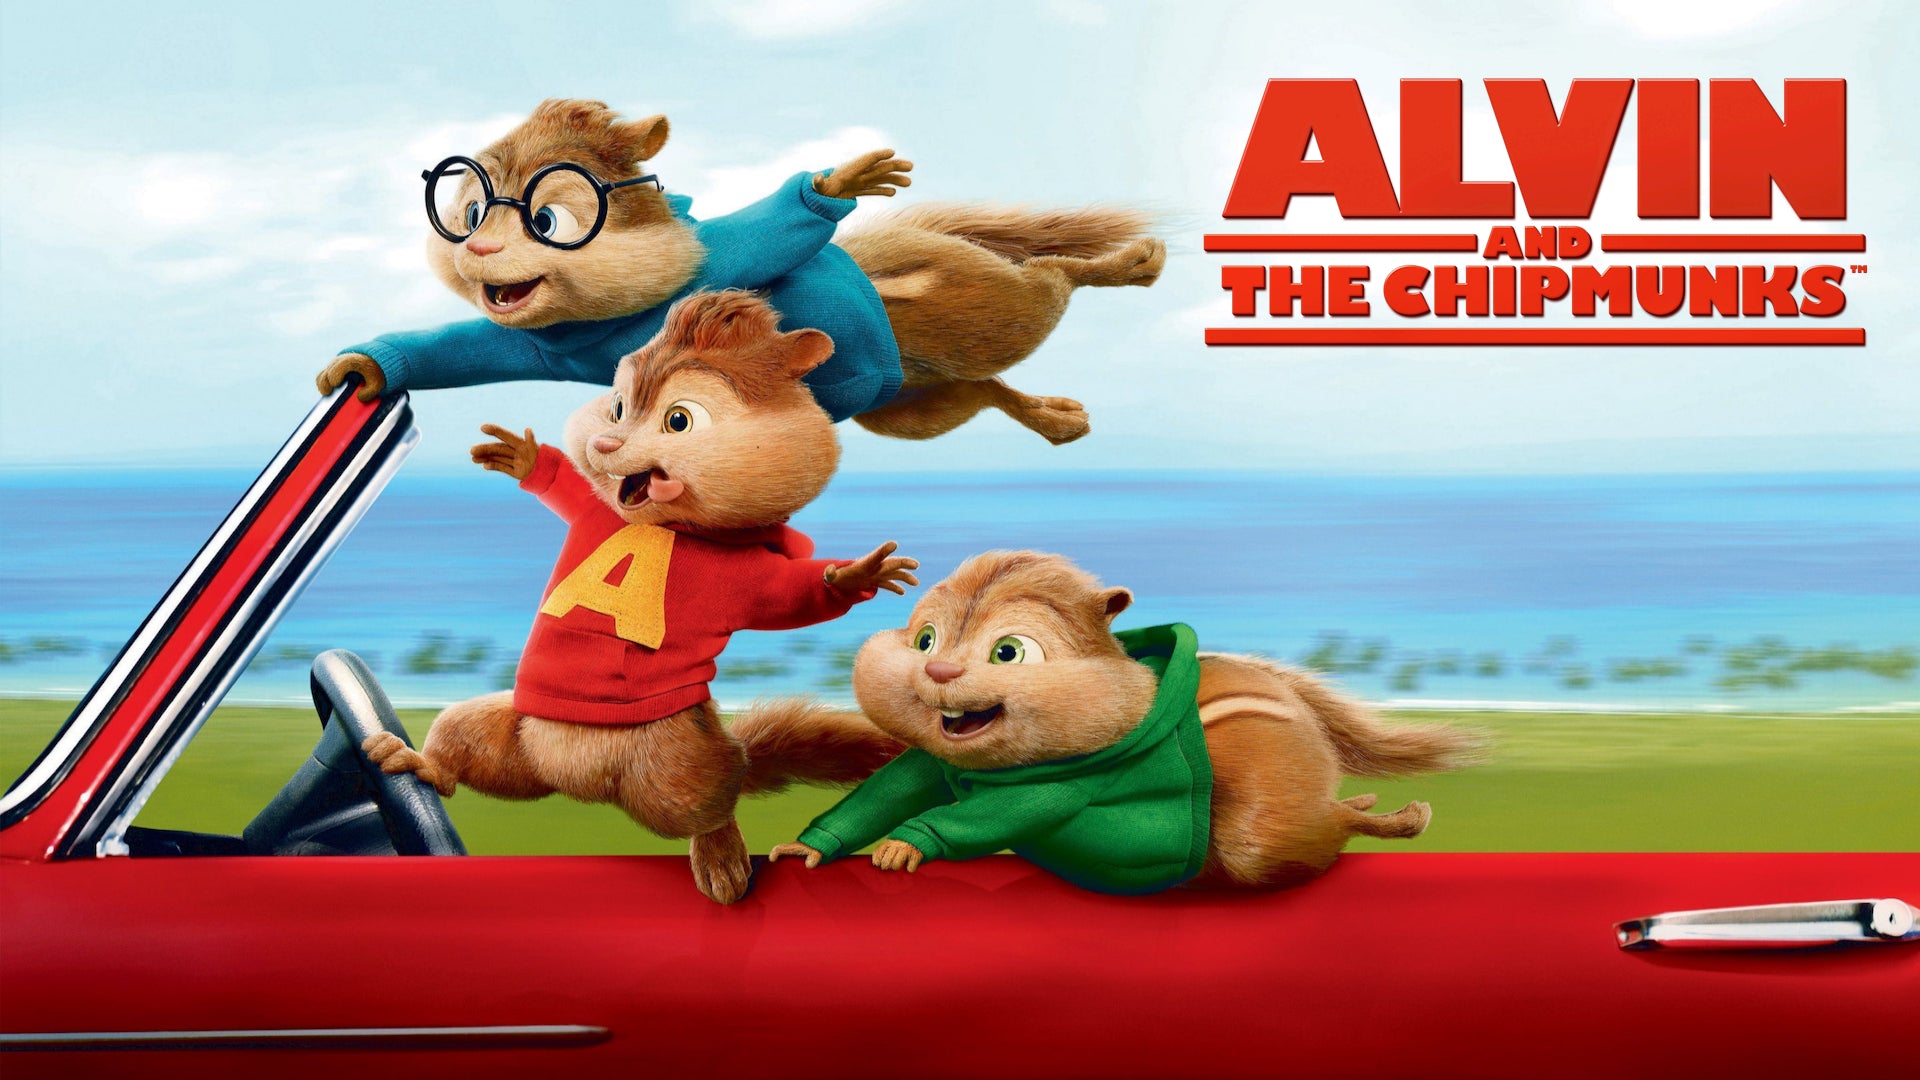 Alvin and the Chipmunks 4 Movie Collection DVD Box Set